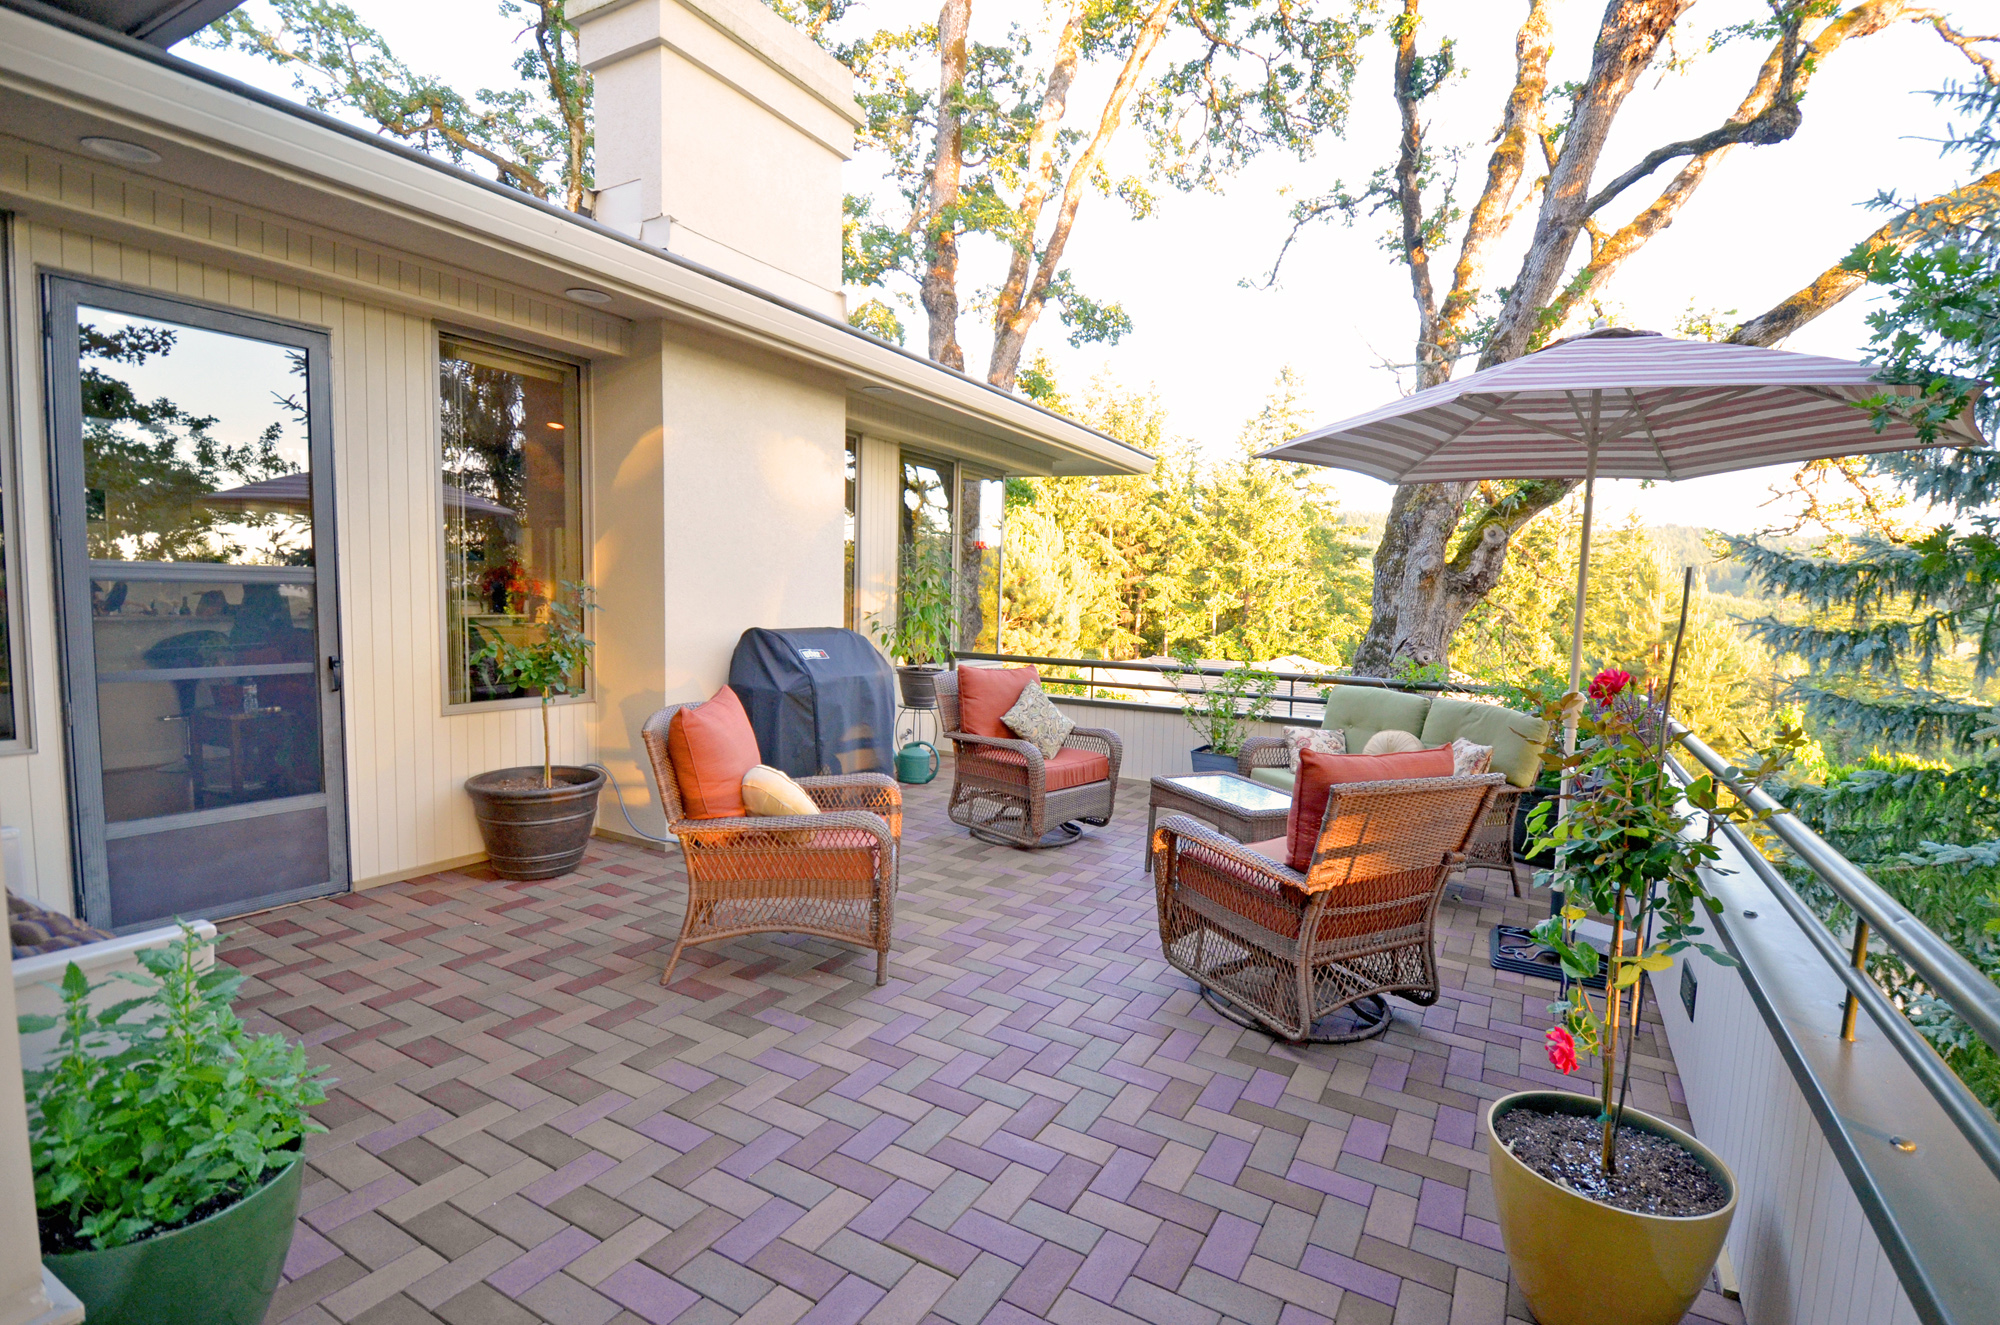 AZEK Resurface Pavers can transform decks, balconies and rooftops.